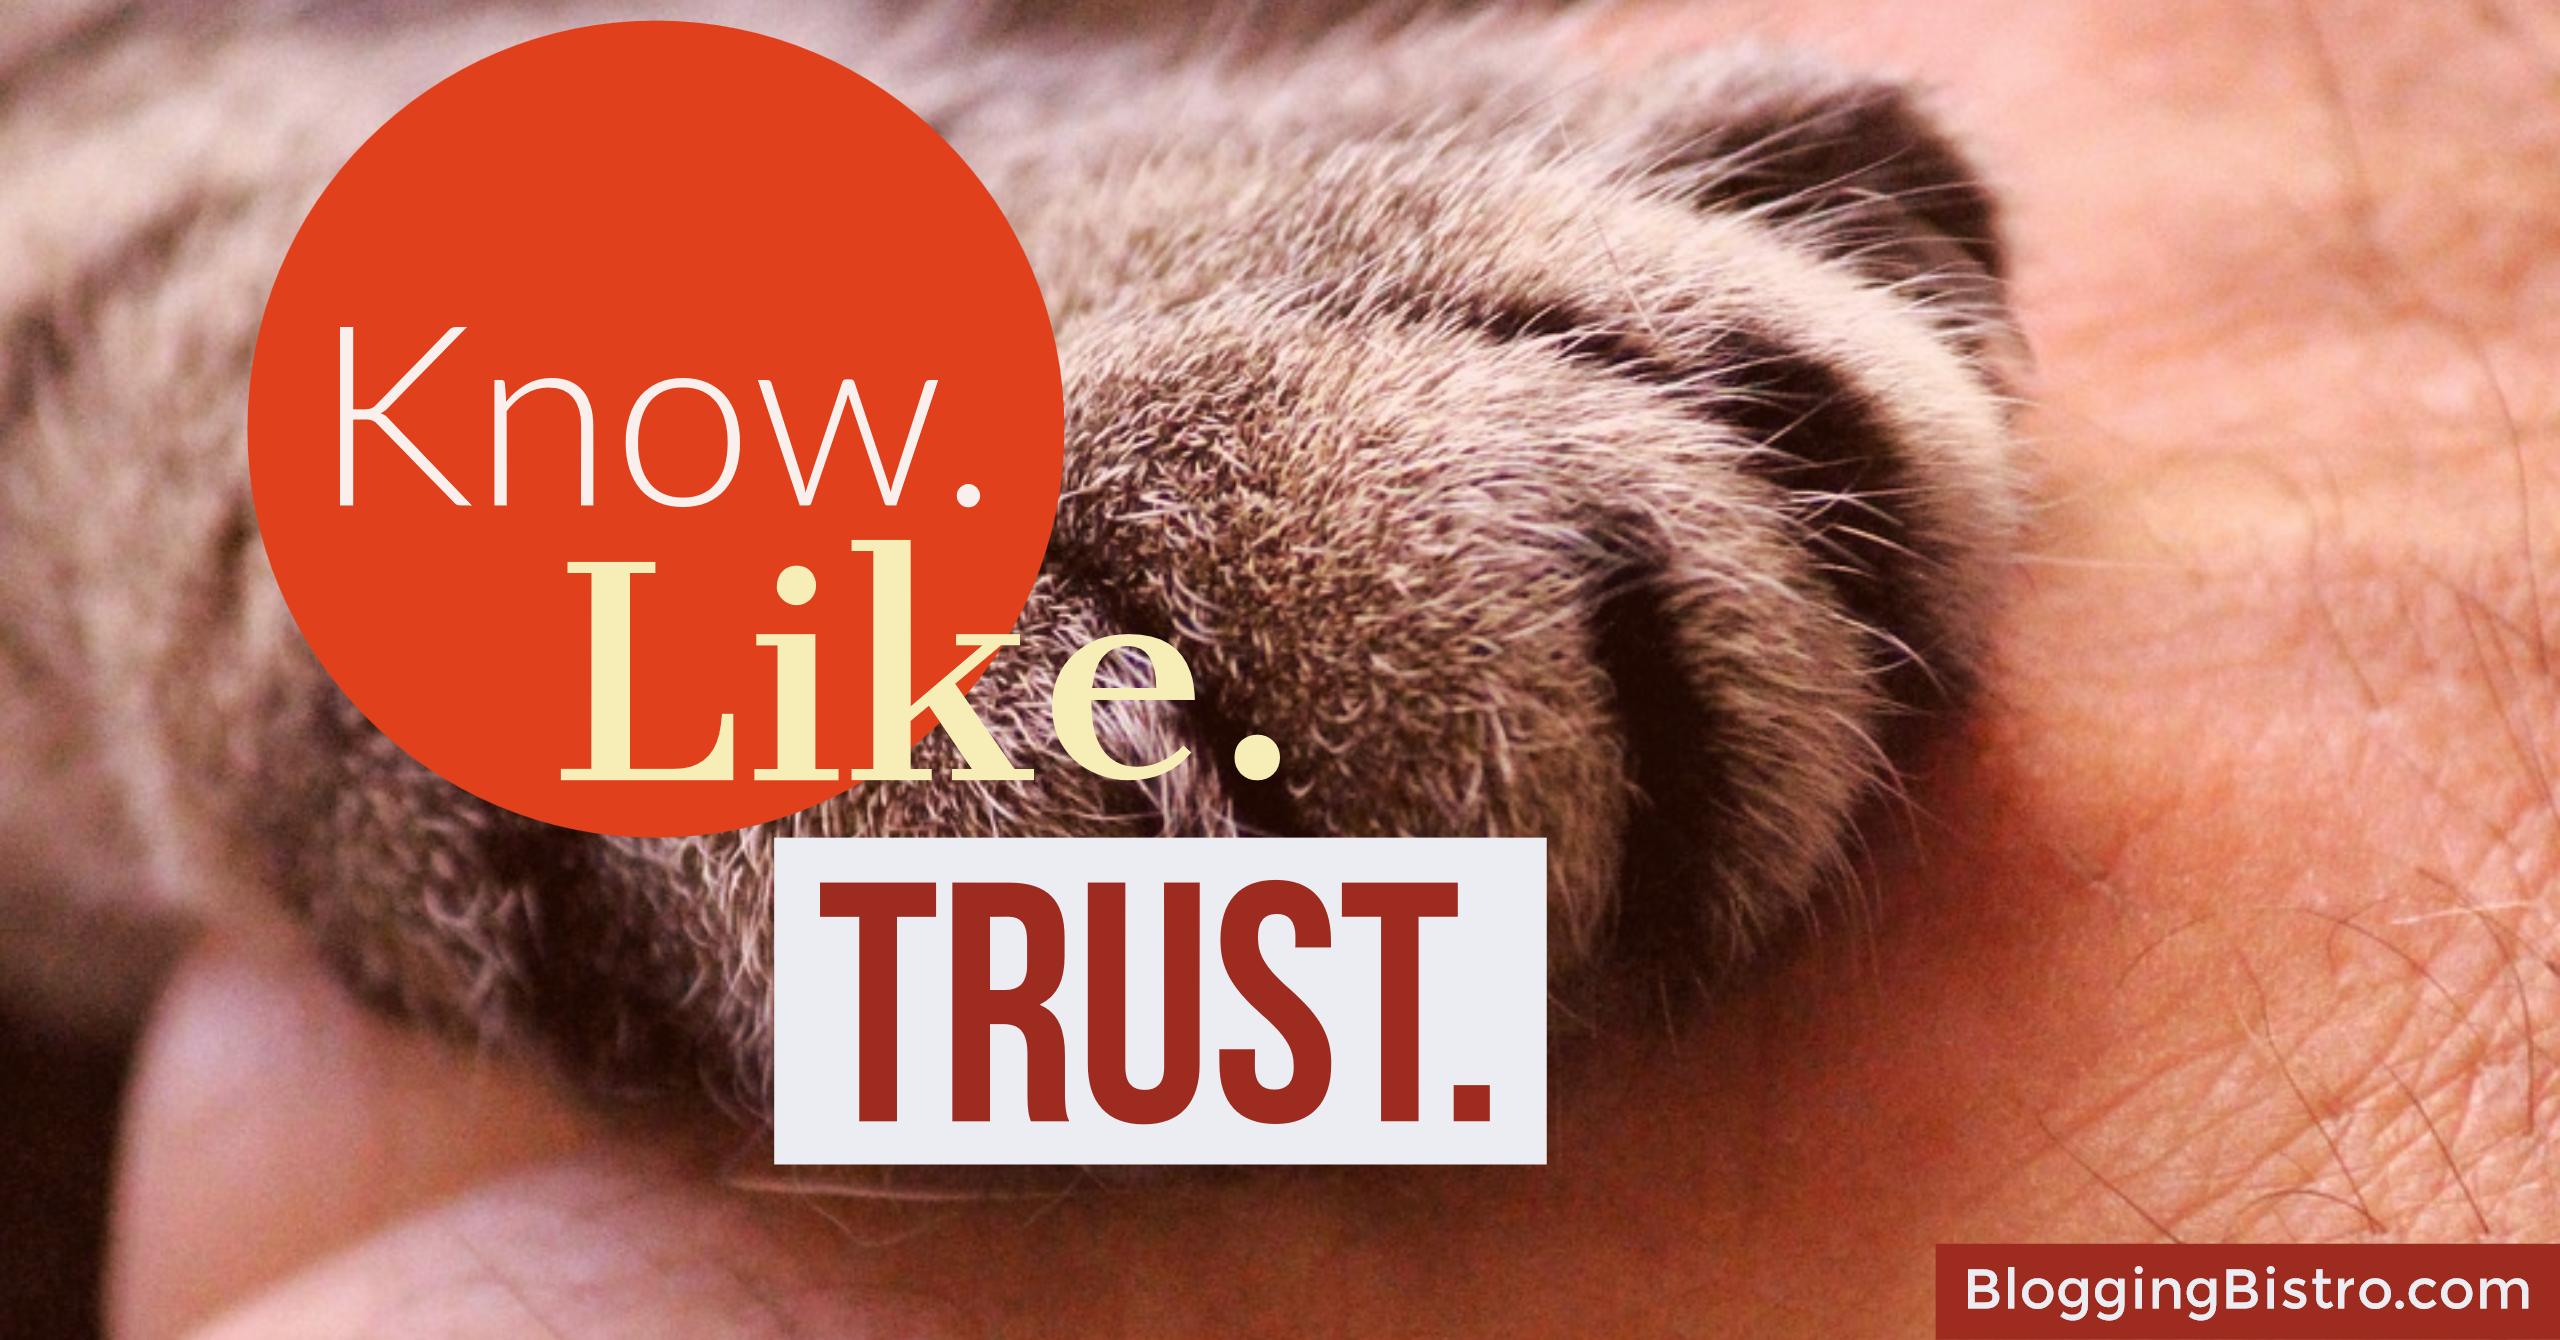 Help prospective customers get to know, like, and trust you. | BloggingBistro.com